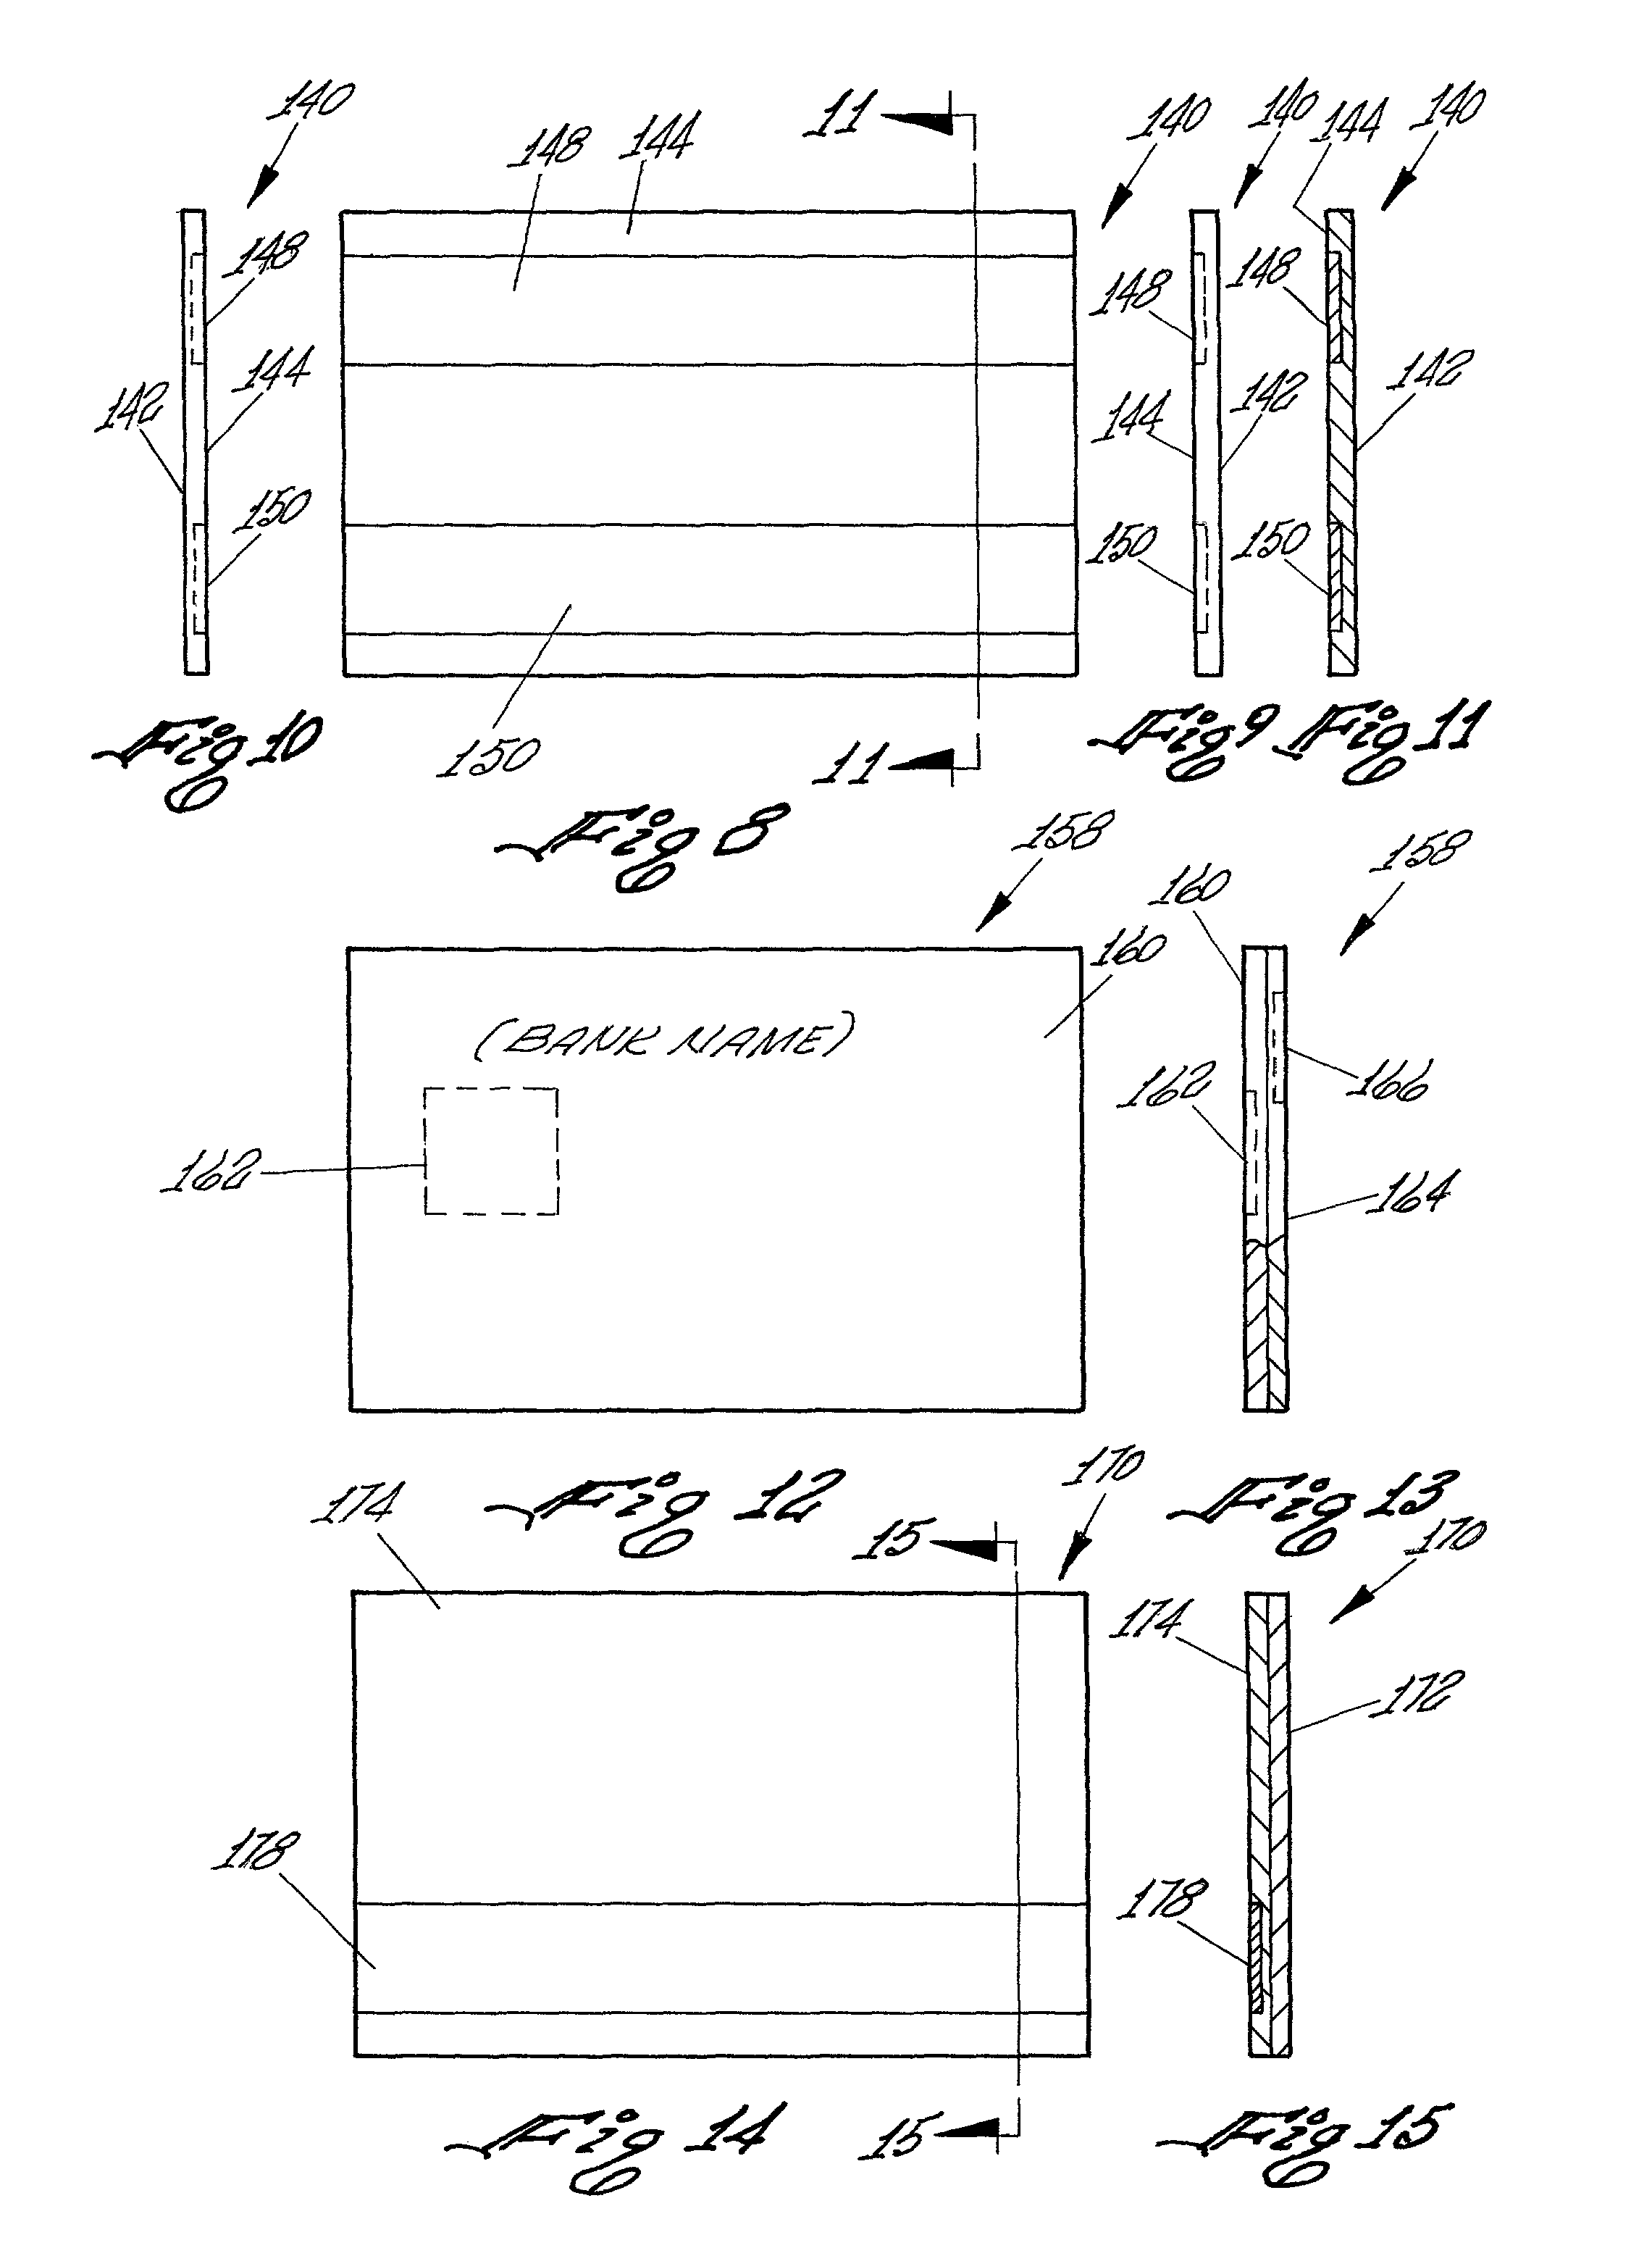 Data storage device, apparatus and method for using same